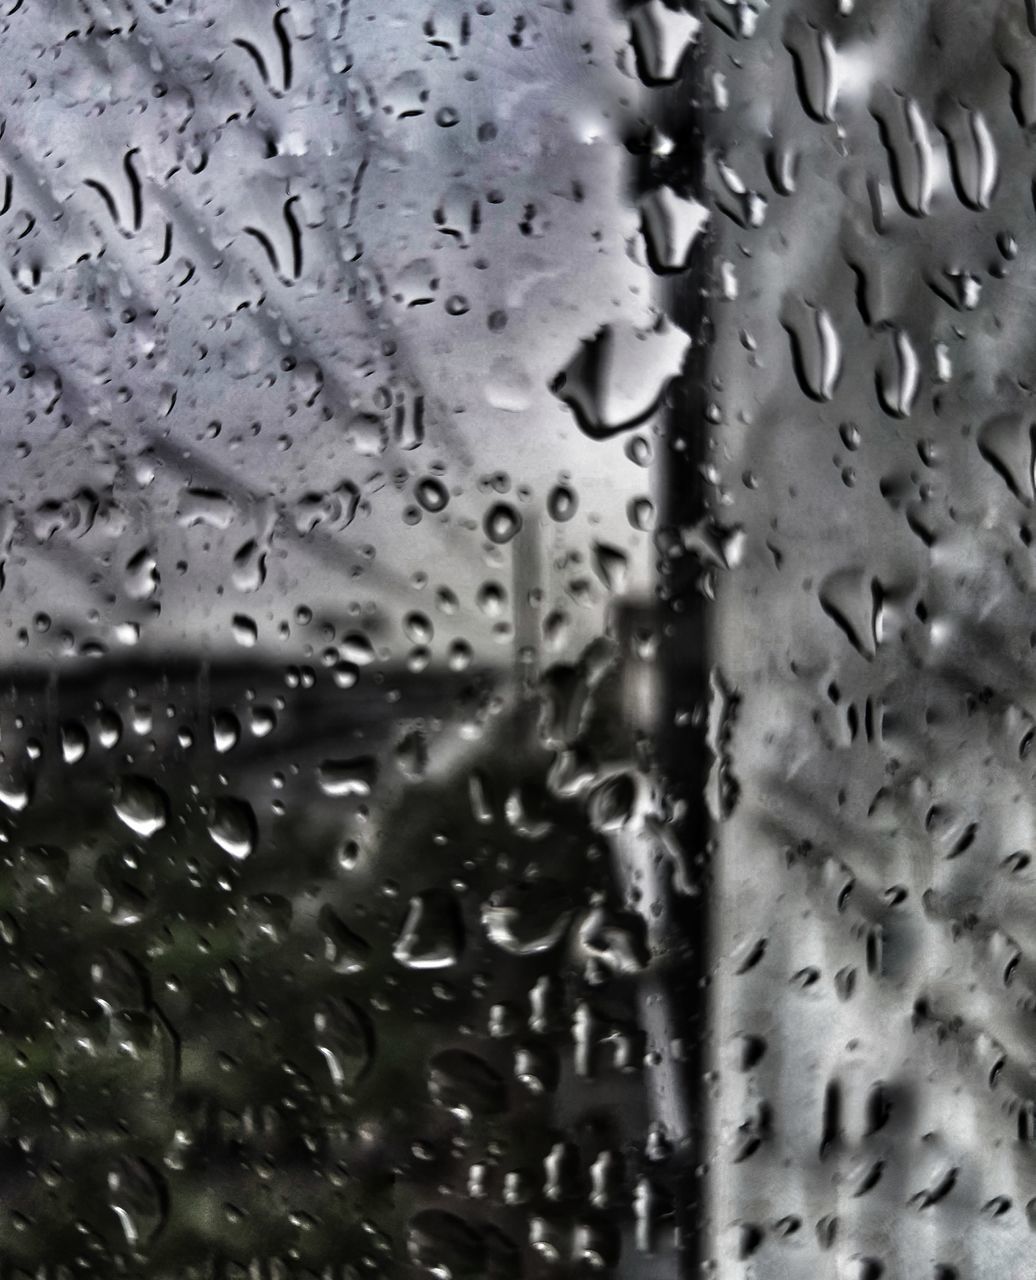 drop, wet, rain, window, water, glass, full frame, backgrounds, raindrop, transparent, monochrome, no people, freezing, black and white, close-up, nature, rainy season, indoors, drizzle, snow, monsoon, car, day, leaf, mode of transportation, monochrome photography, pattern, motor vehicle, transportation, focus on foreground, vehicle interior, macro photography